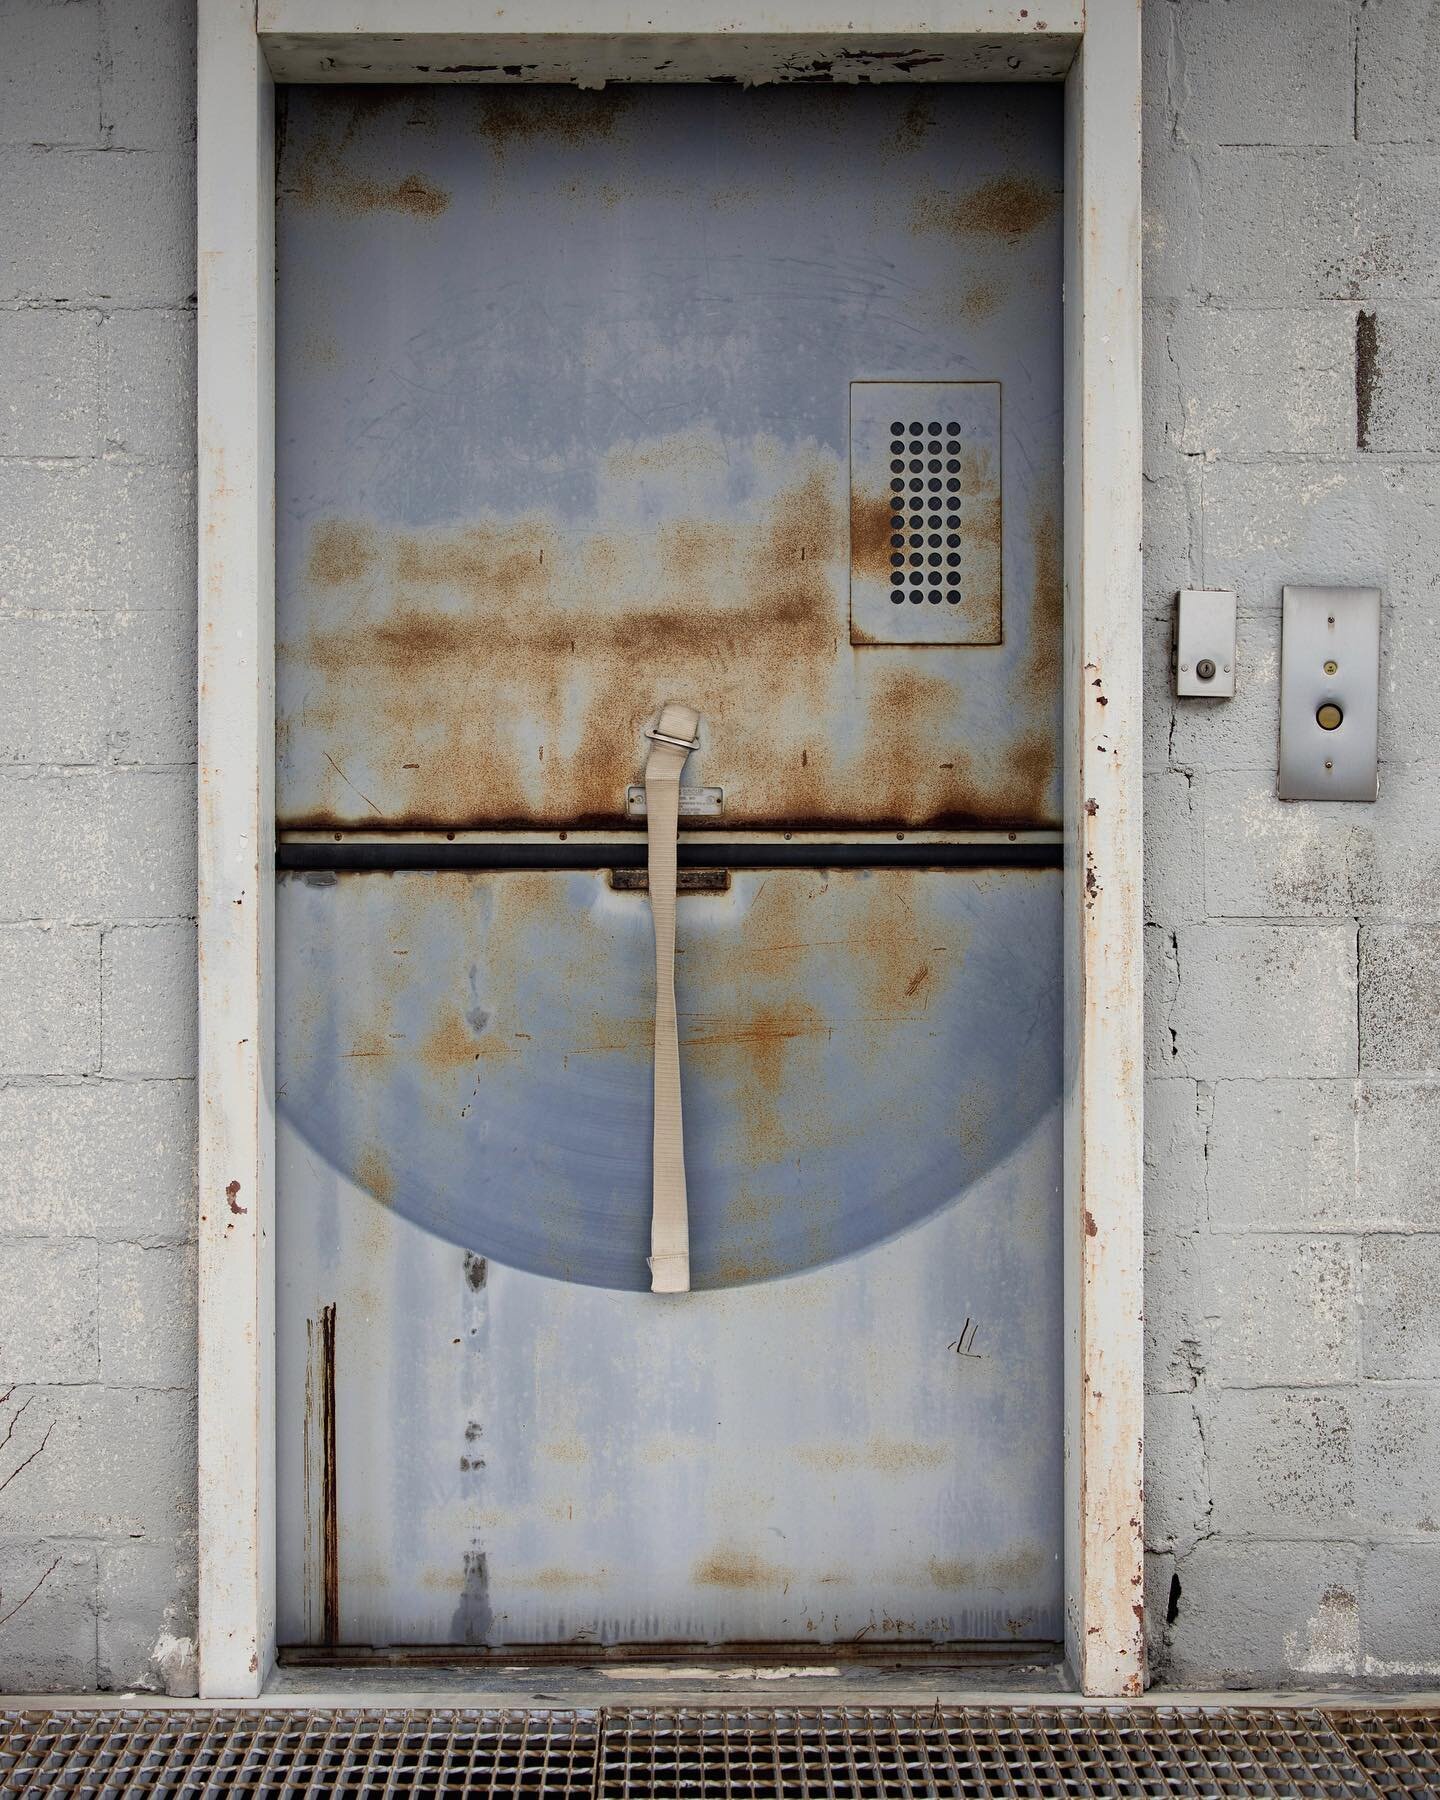 This small freight elevator is located on the rooftop helipad at 222 Mitchell Street in @southdwntn. It&rsquo;s purpose was for secure money deposits from a helicopter directly down to the Citizens &amp; Southern Bank vault on the ground floor in thi